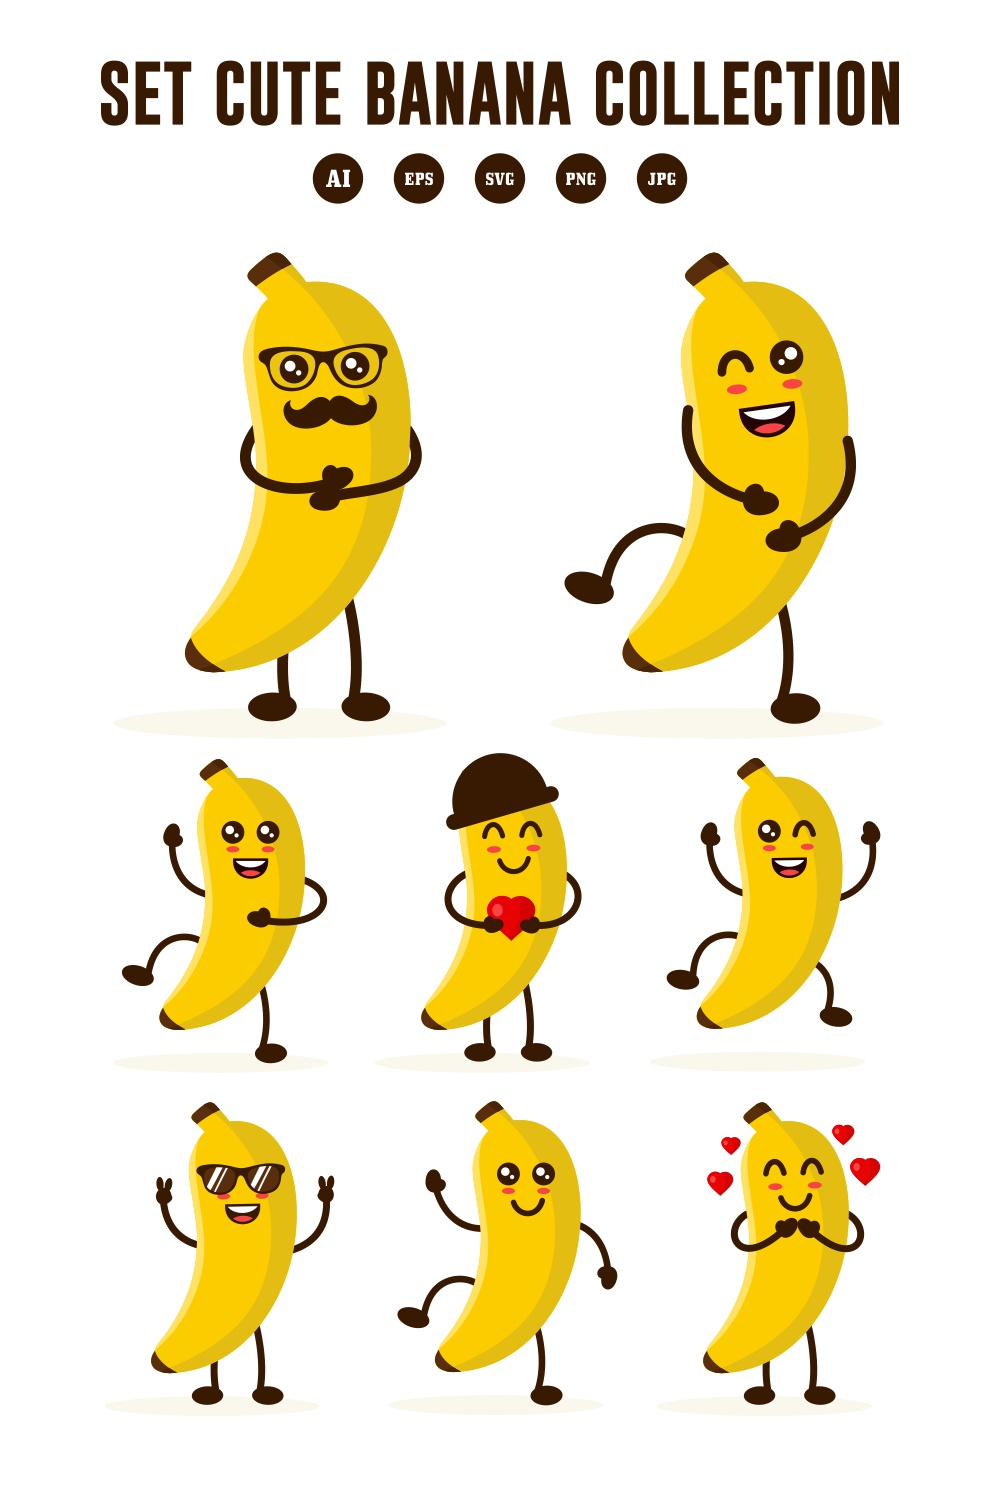 Set Cute Banana character design collection - $4 pinterest preview image.